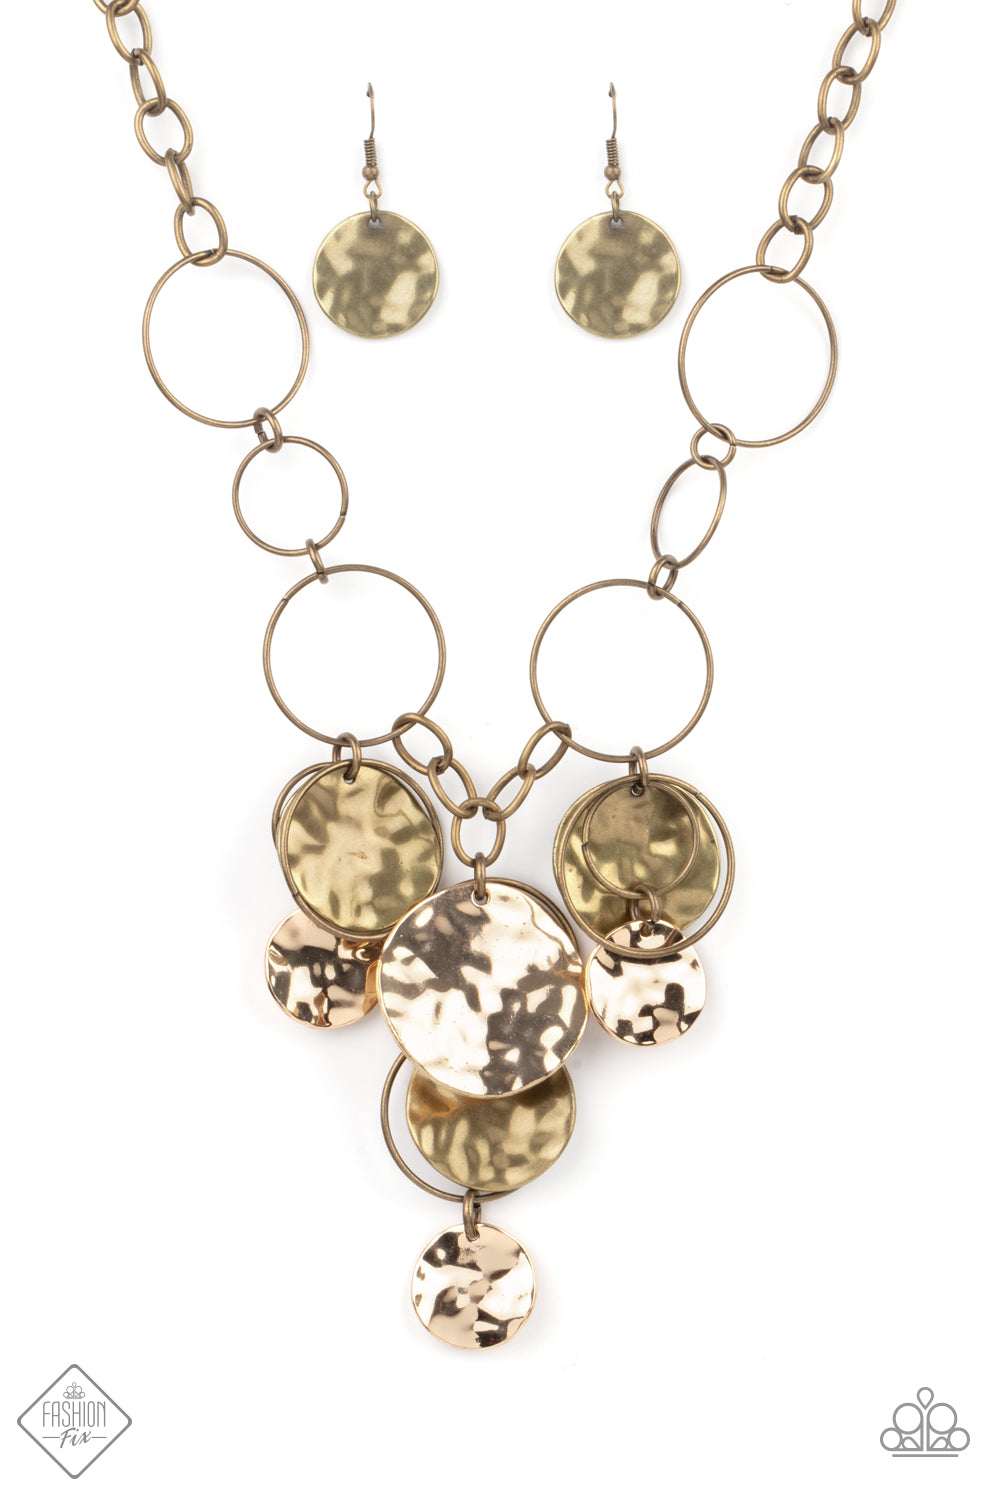 Learn the HARDWARE Way - Brass and Gold Fashion Necklace - Paparazzi Accessories - Antiqued brass hoops link with a section of chunky brass chain below the collar. Rustic brass hoops and hammered gold and brass discs cascade from the bottom of the mixed metallic display, creating a boisterous fringe fashion necklace. 